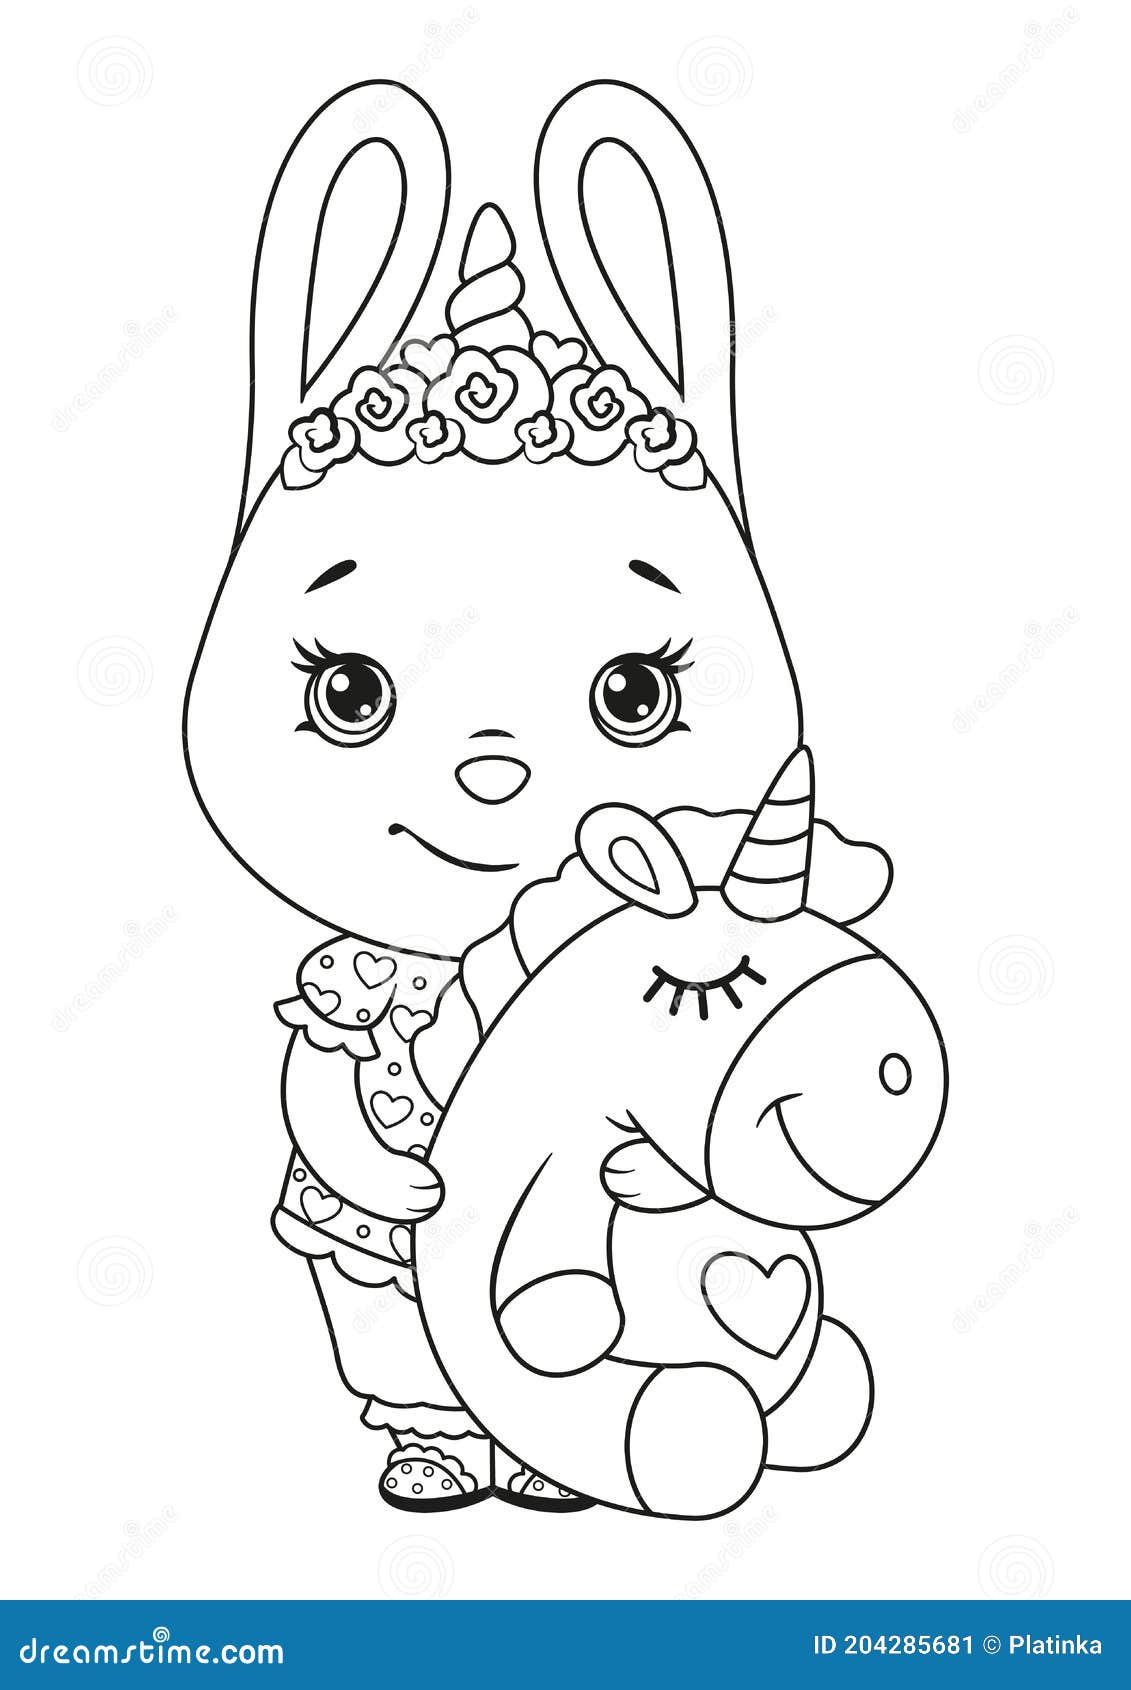 Bunny in pajamas with toy unicorn coloring page black and white cartoon illustration stock vector